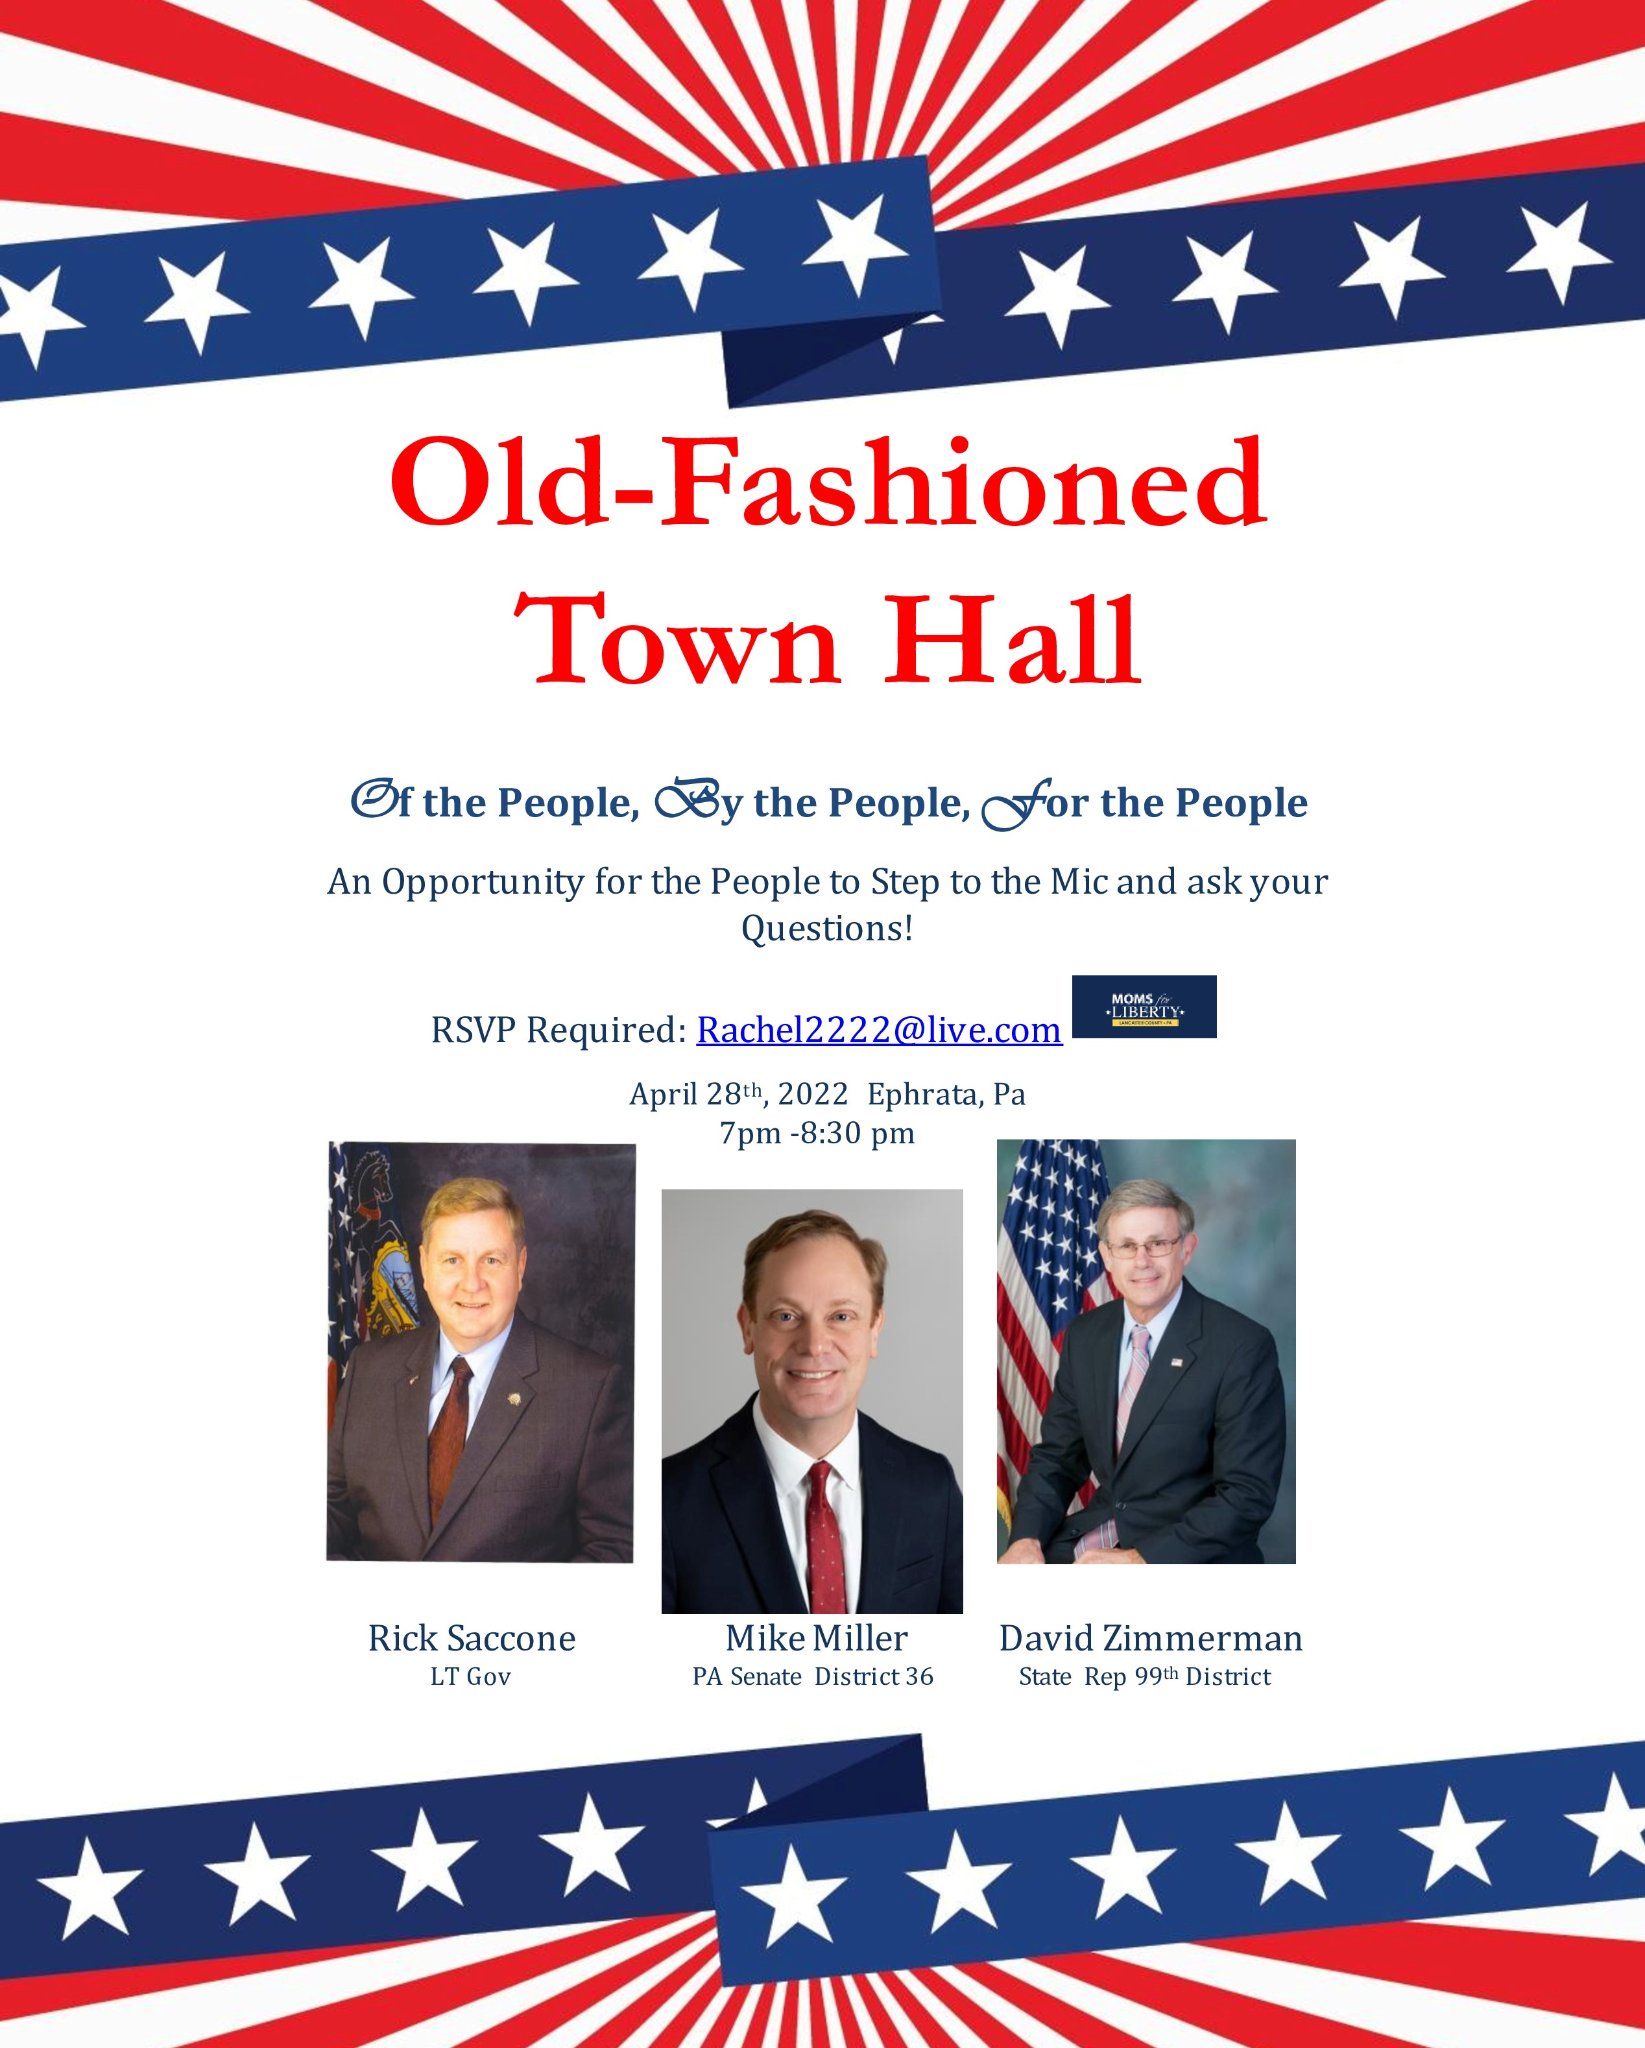 Old-Fashioned Town Hall Flyer